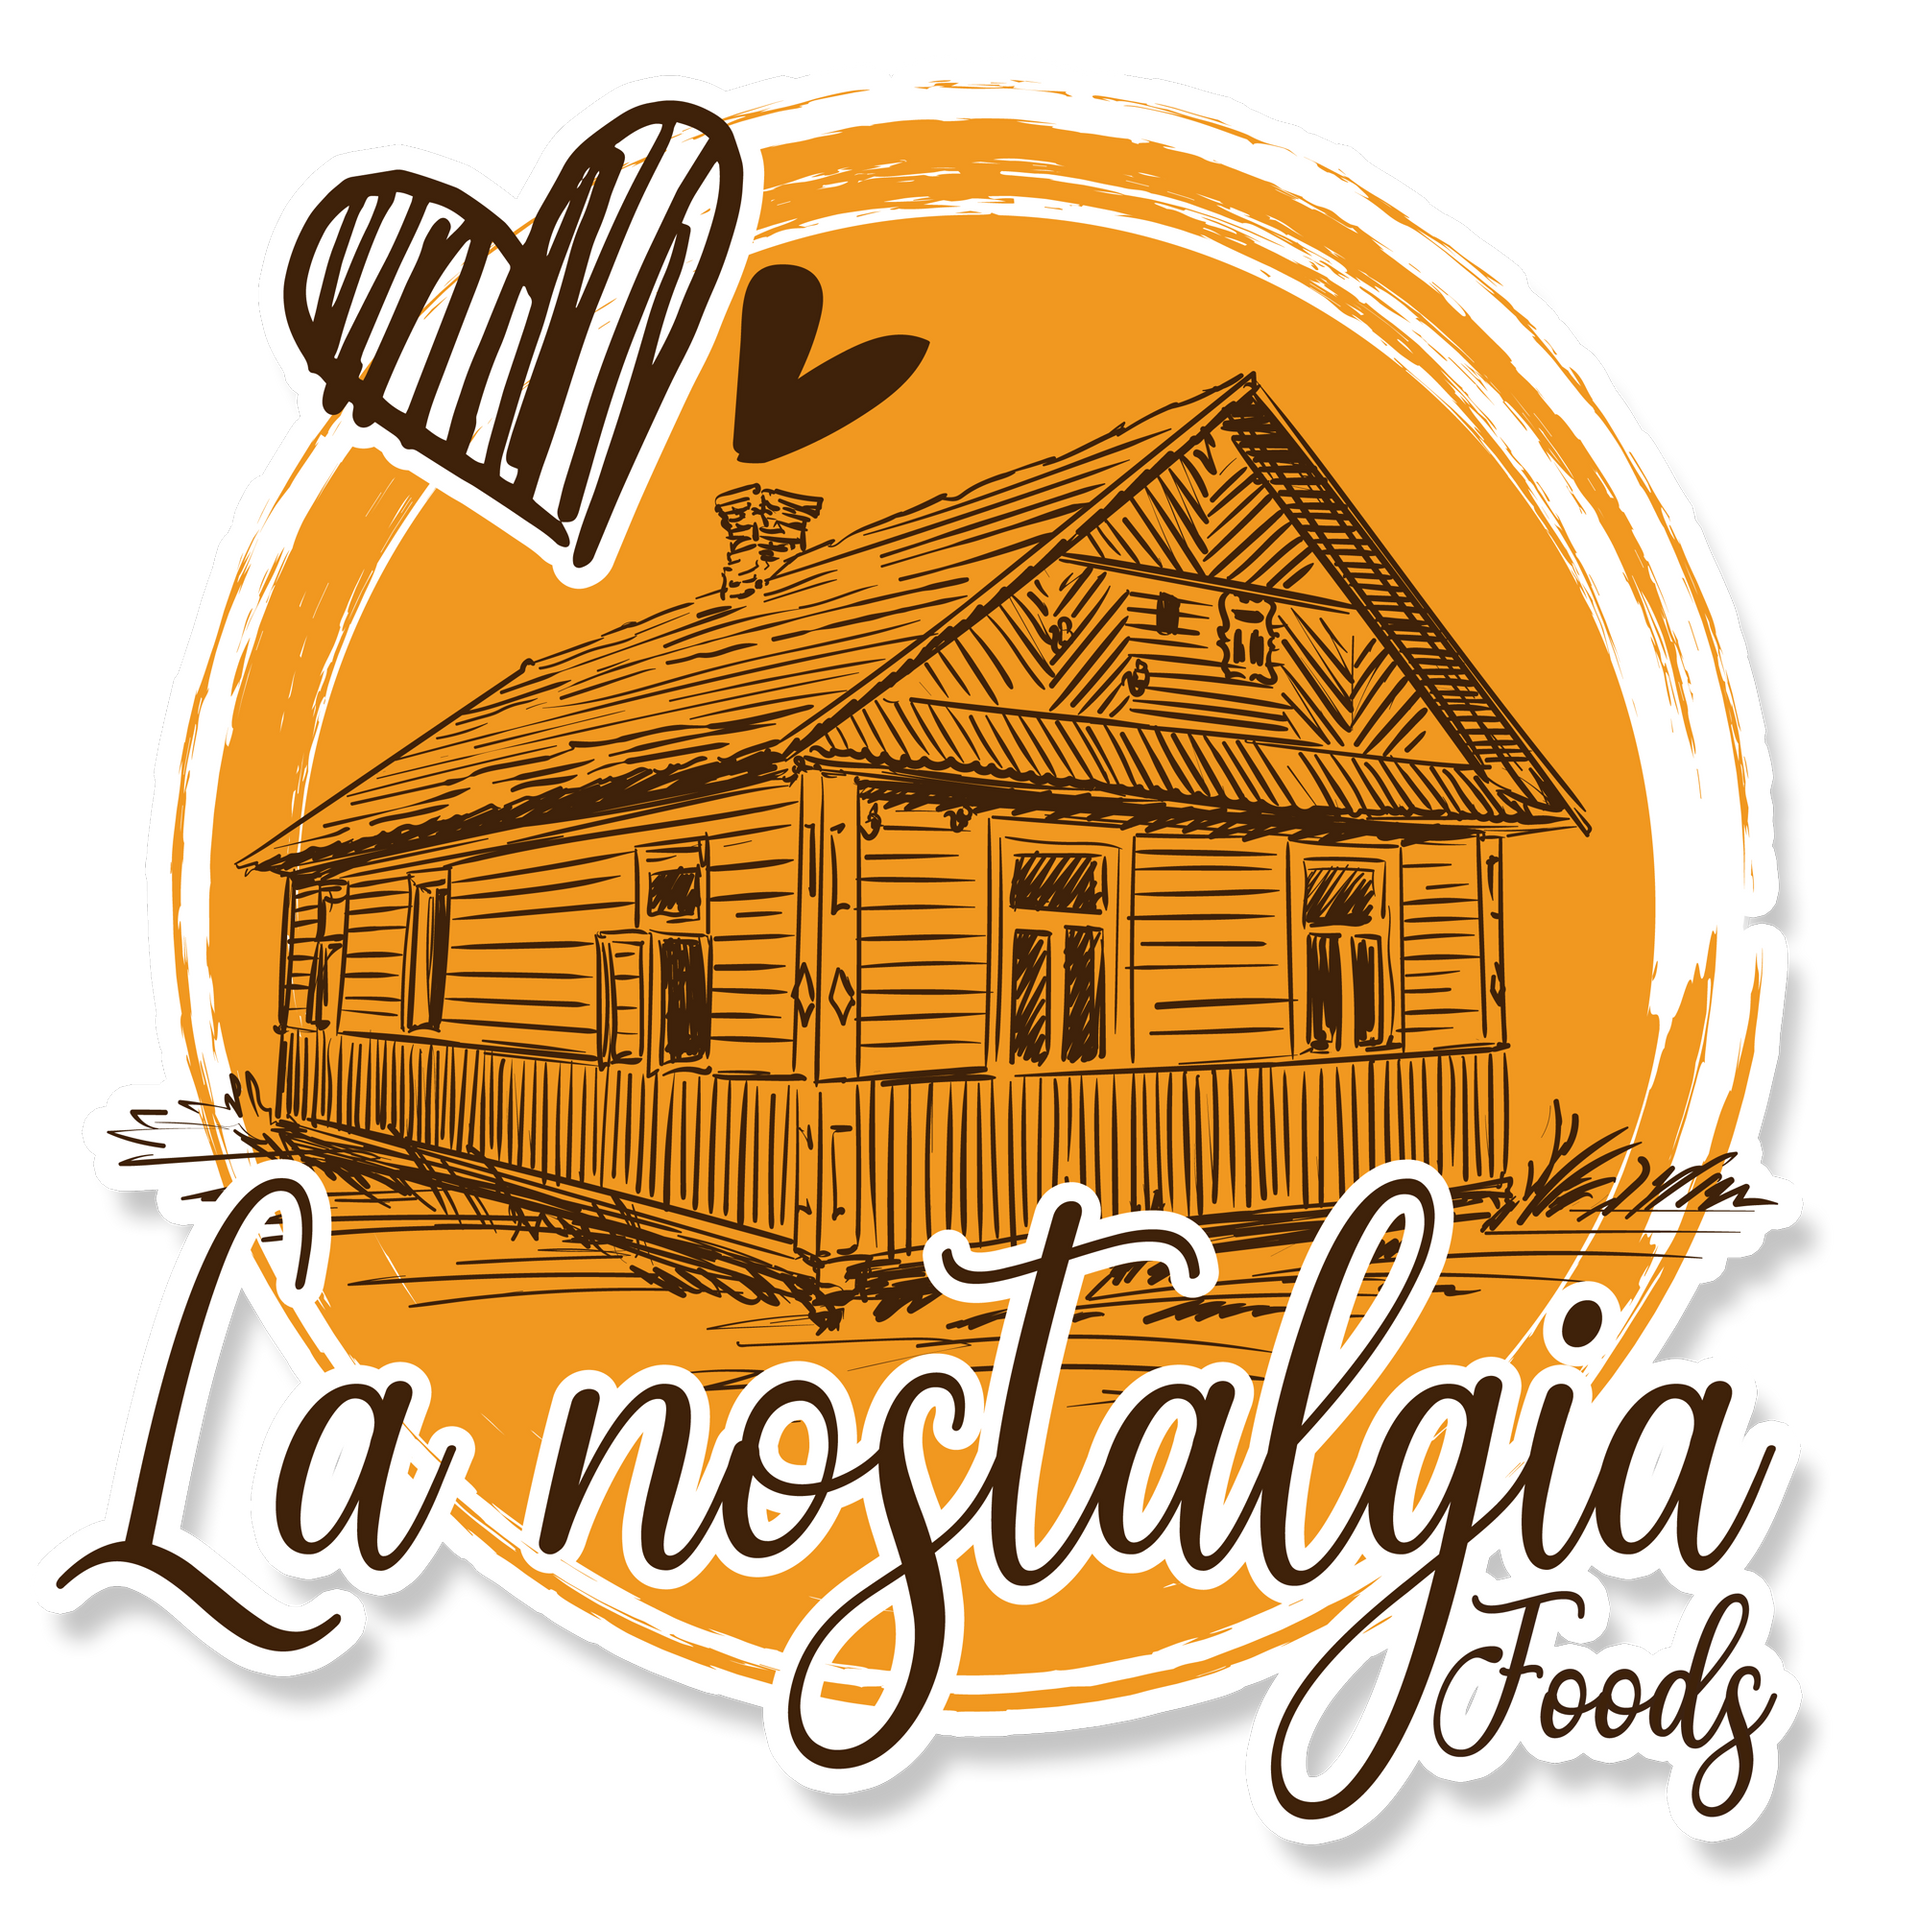 A logo for la nostalgia foods with a wooden house and a heart.